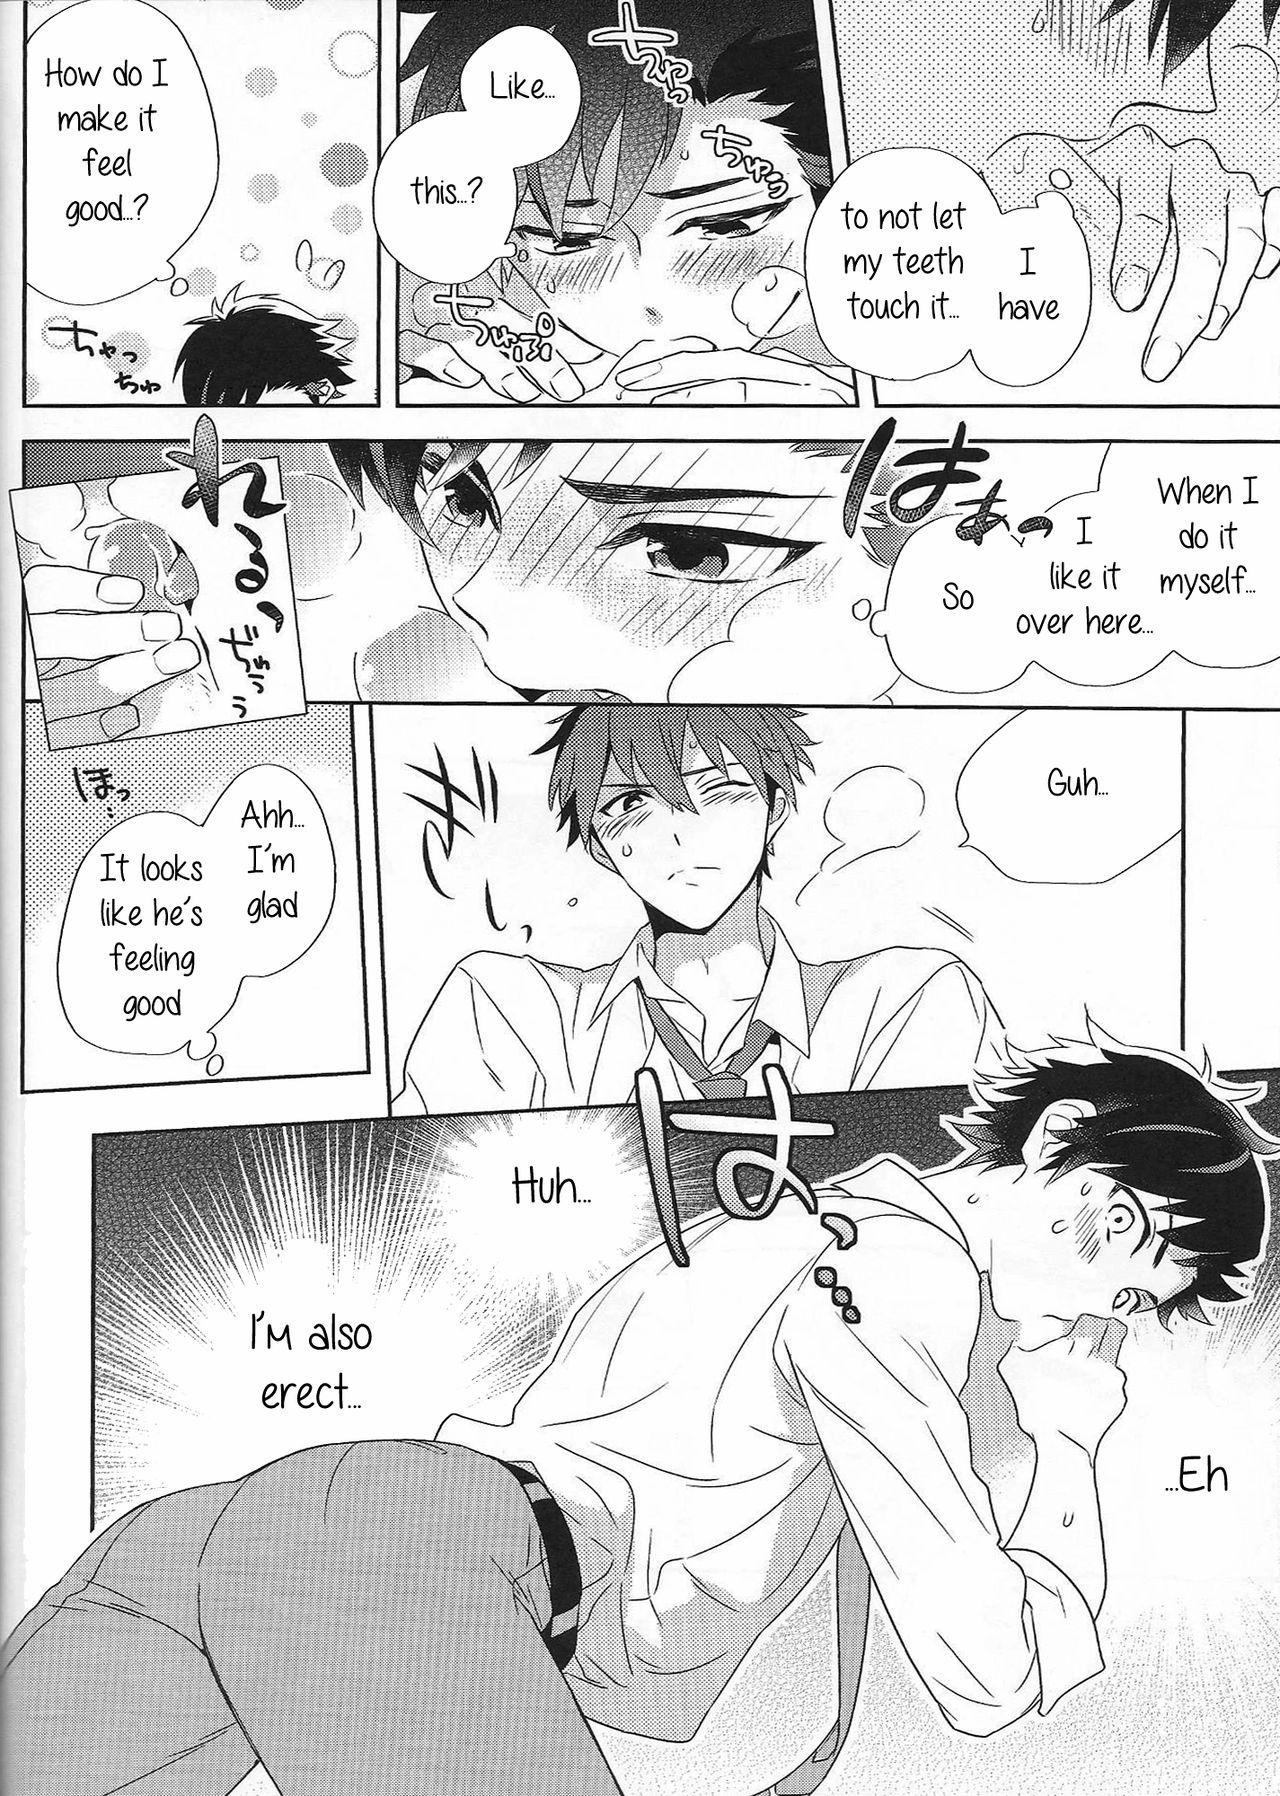 Nagumo! Isshou no Onegai da! - This Is The Only Thing I'll Ever Ask You! 20